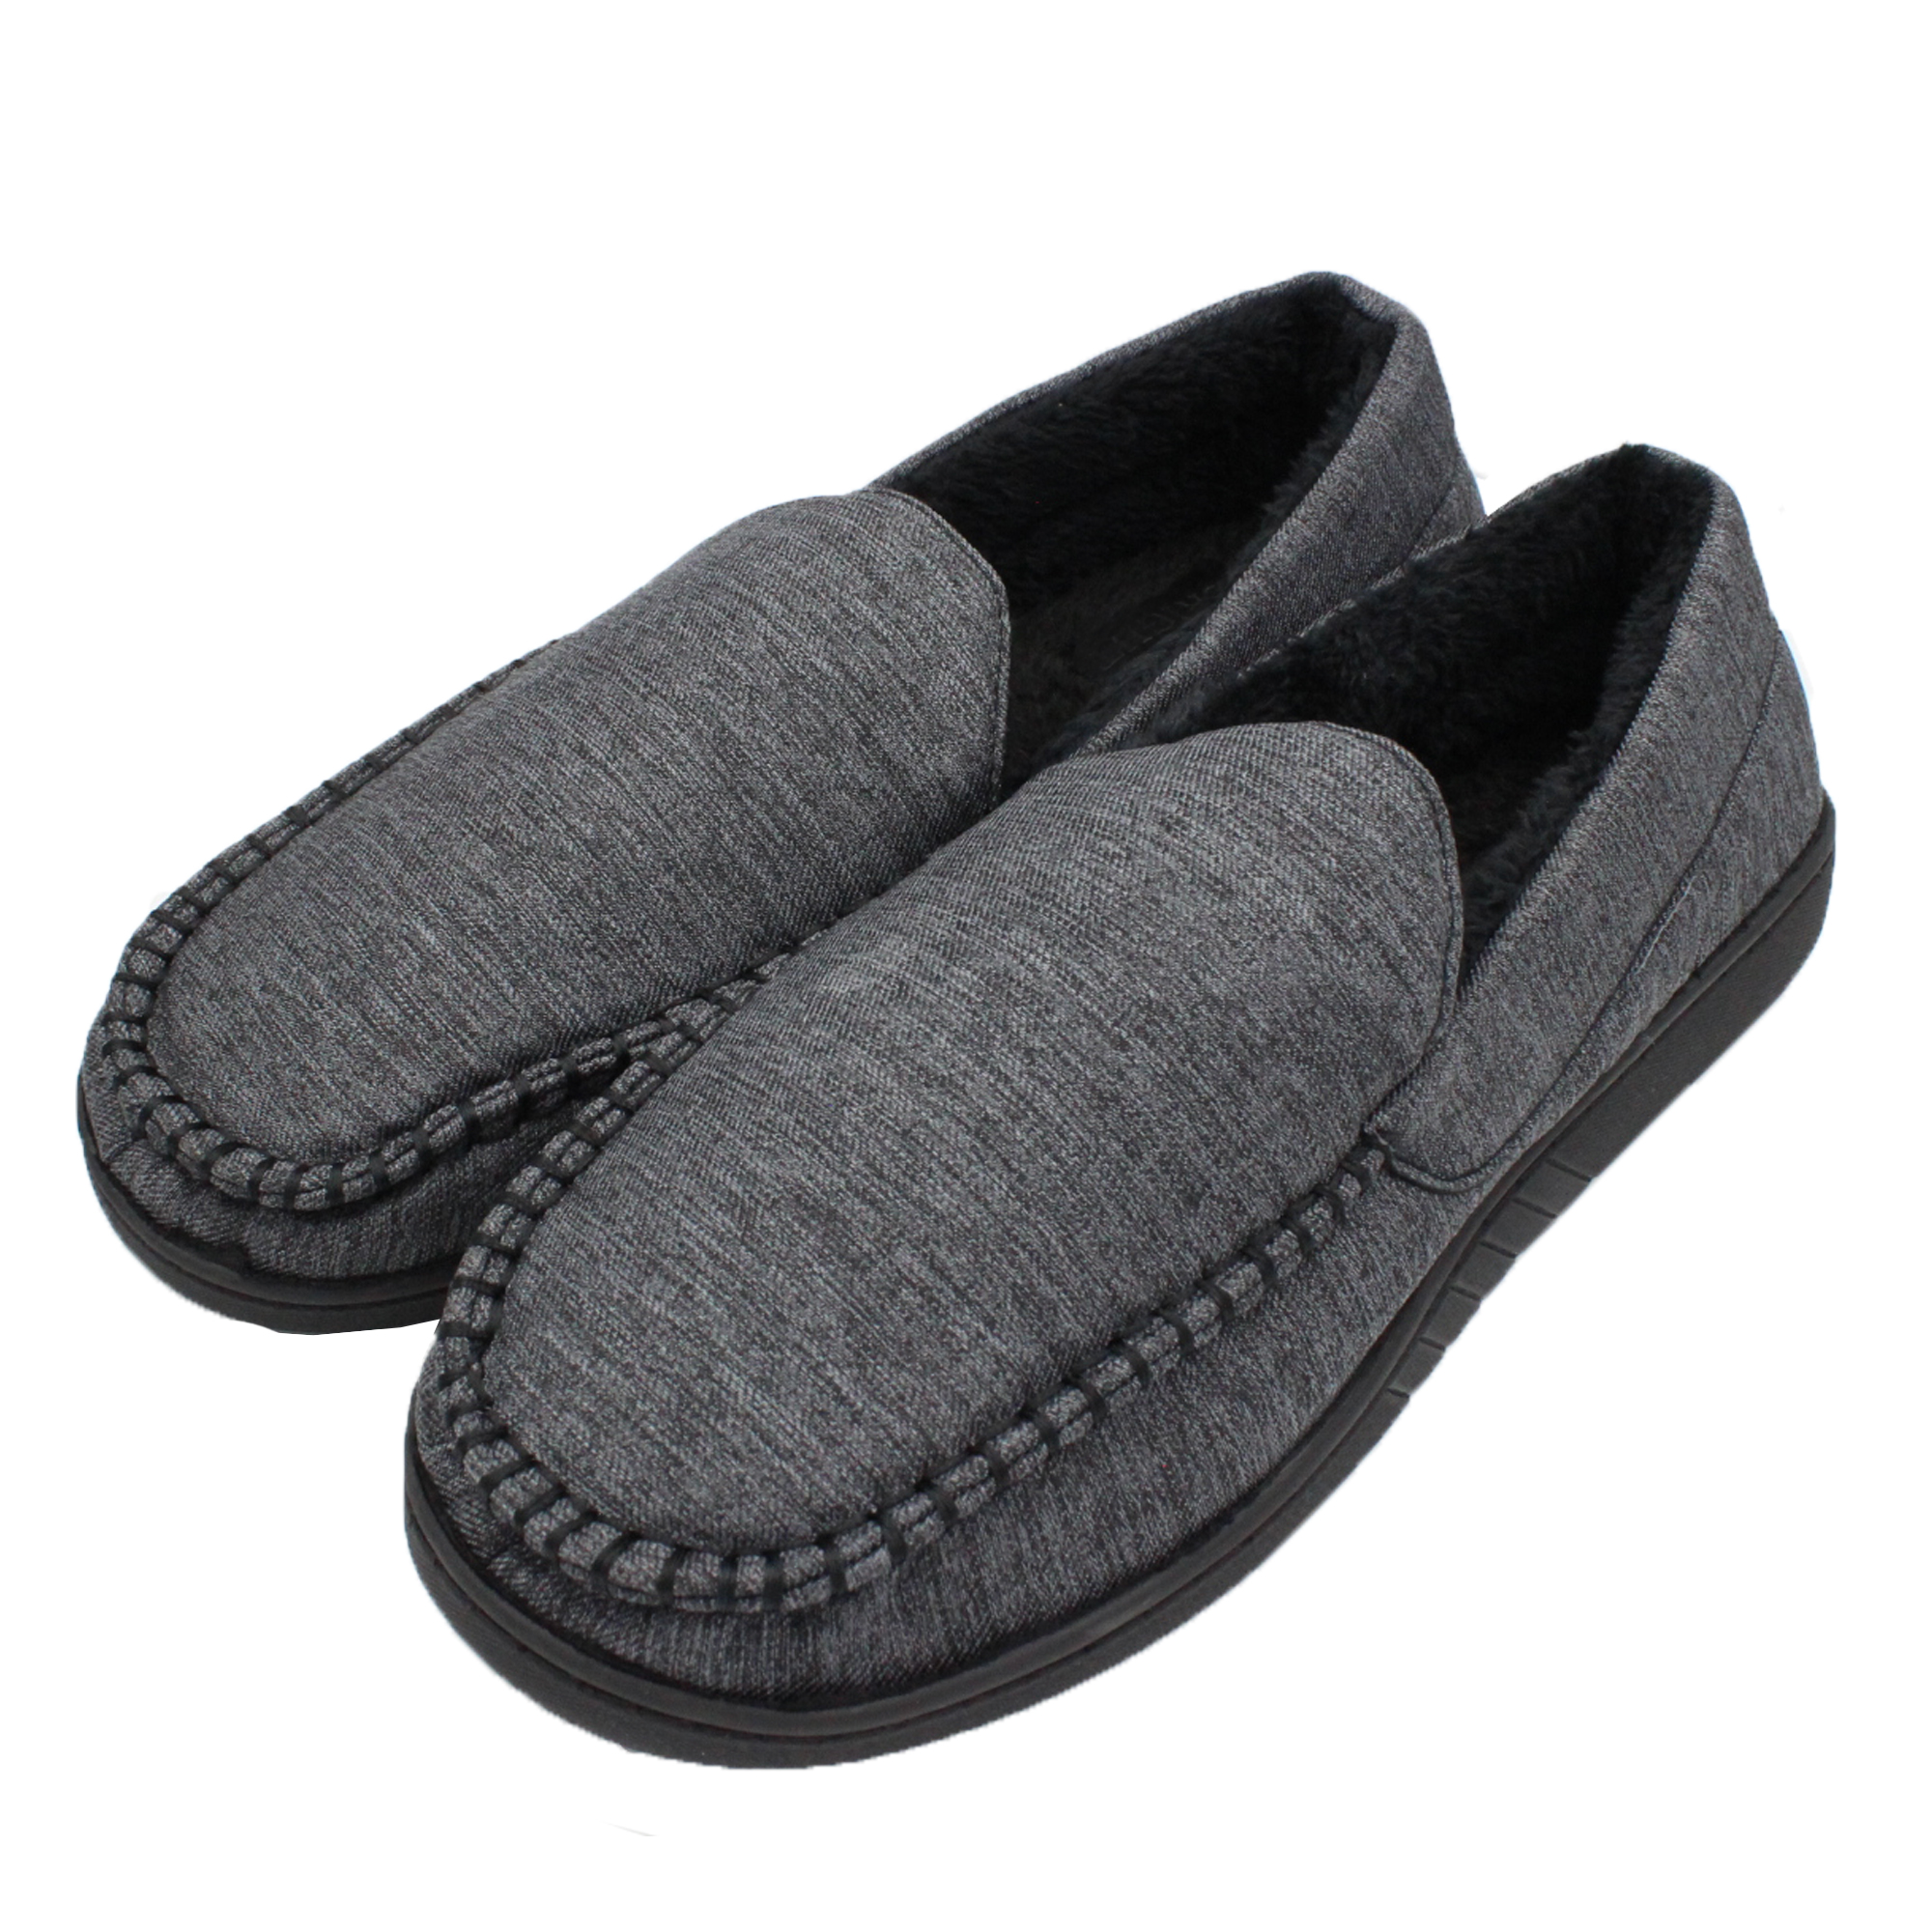 VENTANA Men's Shoes Moccasin House Slippers | Faux Fur Lined House ...